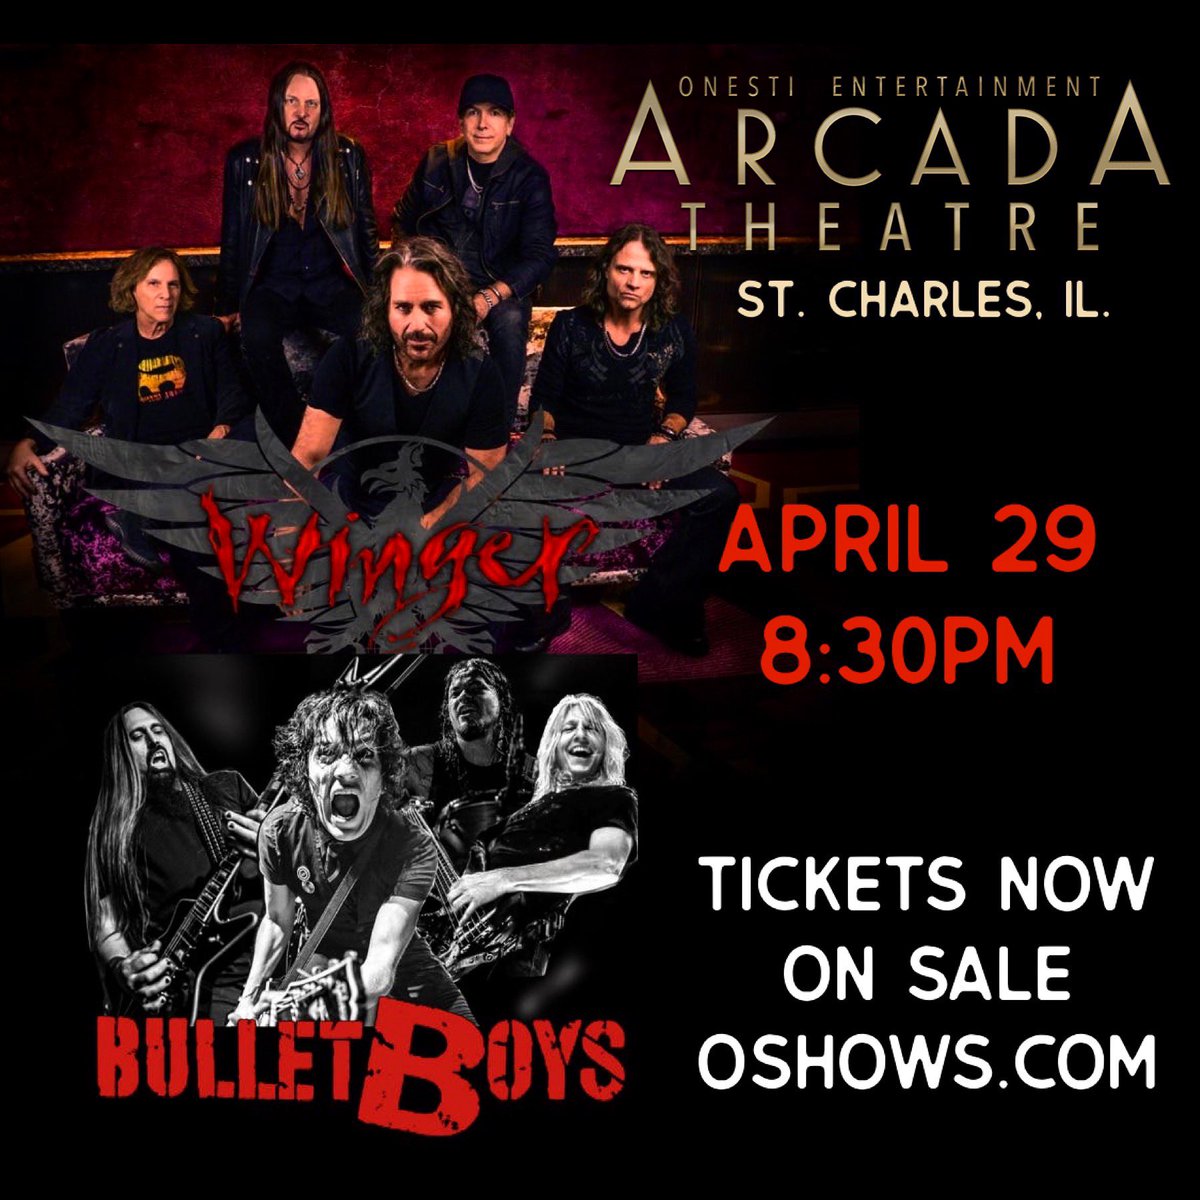 JUST ANNOUNCED! 💥 

@TheBulletBoys & @WingerTheBand 
April 29, 2022
8:30pm
Arcada Theatre
St. Charles, Illinois 

Tickets now on sale 👉🏼 oshows.com

#MarqTorien #irablack #bradlang #fredaching #bulletboys #winger #arcadatheatre #metal